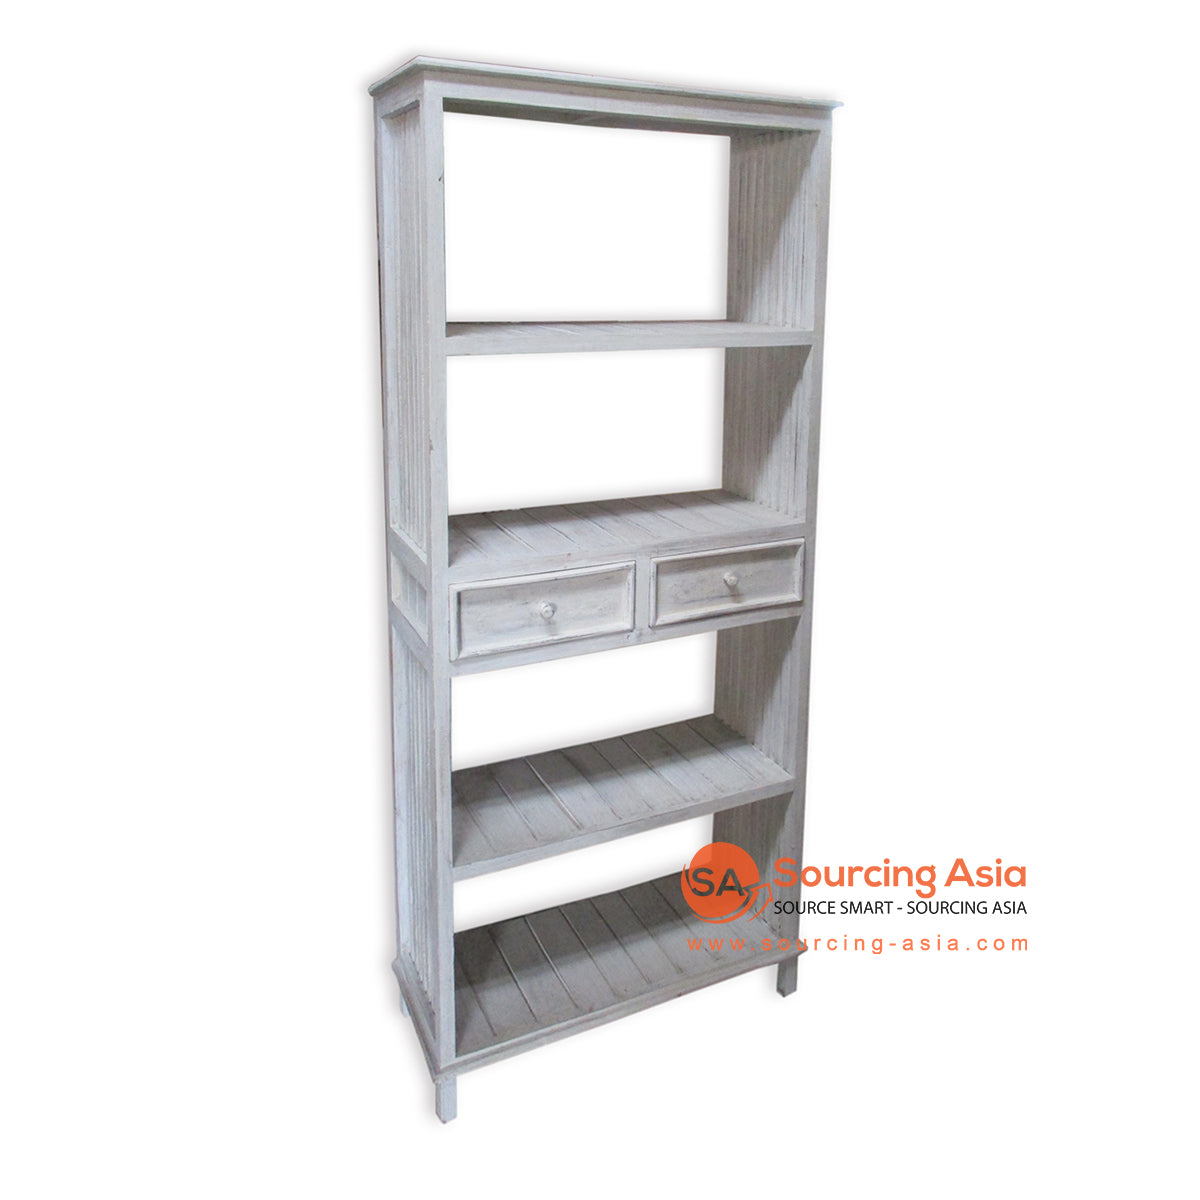 THE138WW WHITE WASH WOODEN BOOK RACK WITH TWO DRAWERS AND FOUR SLOTS